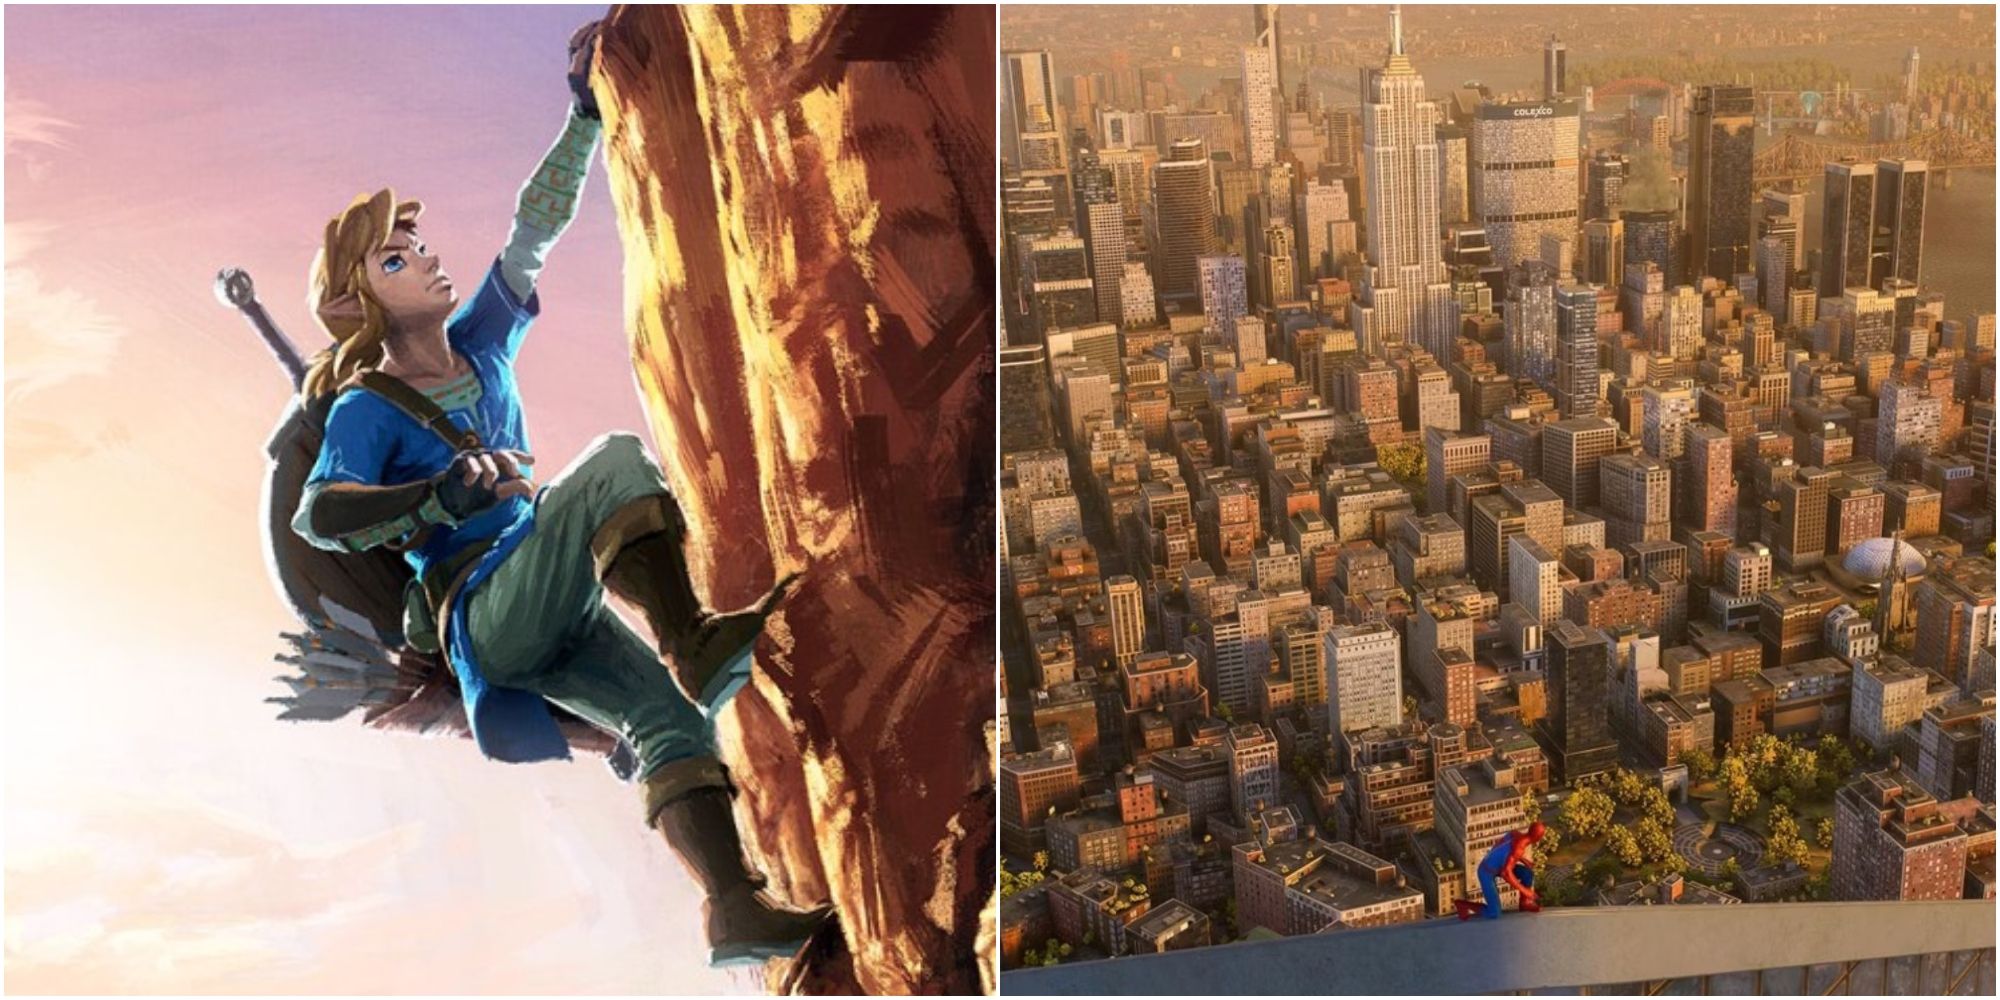 BotW Link climbing up a cliffside beside Spider-Man atop a tall building looking out across New York